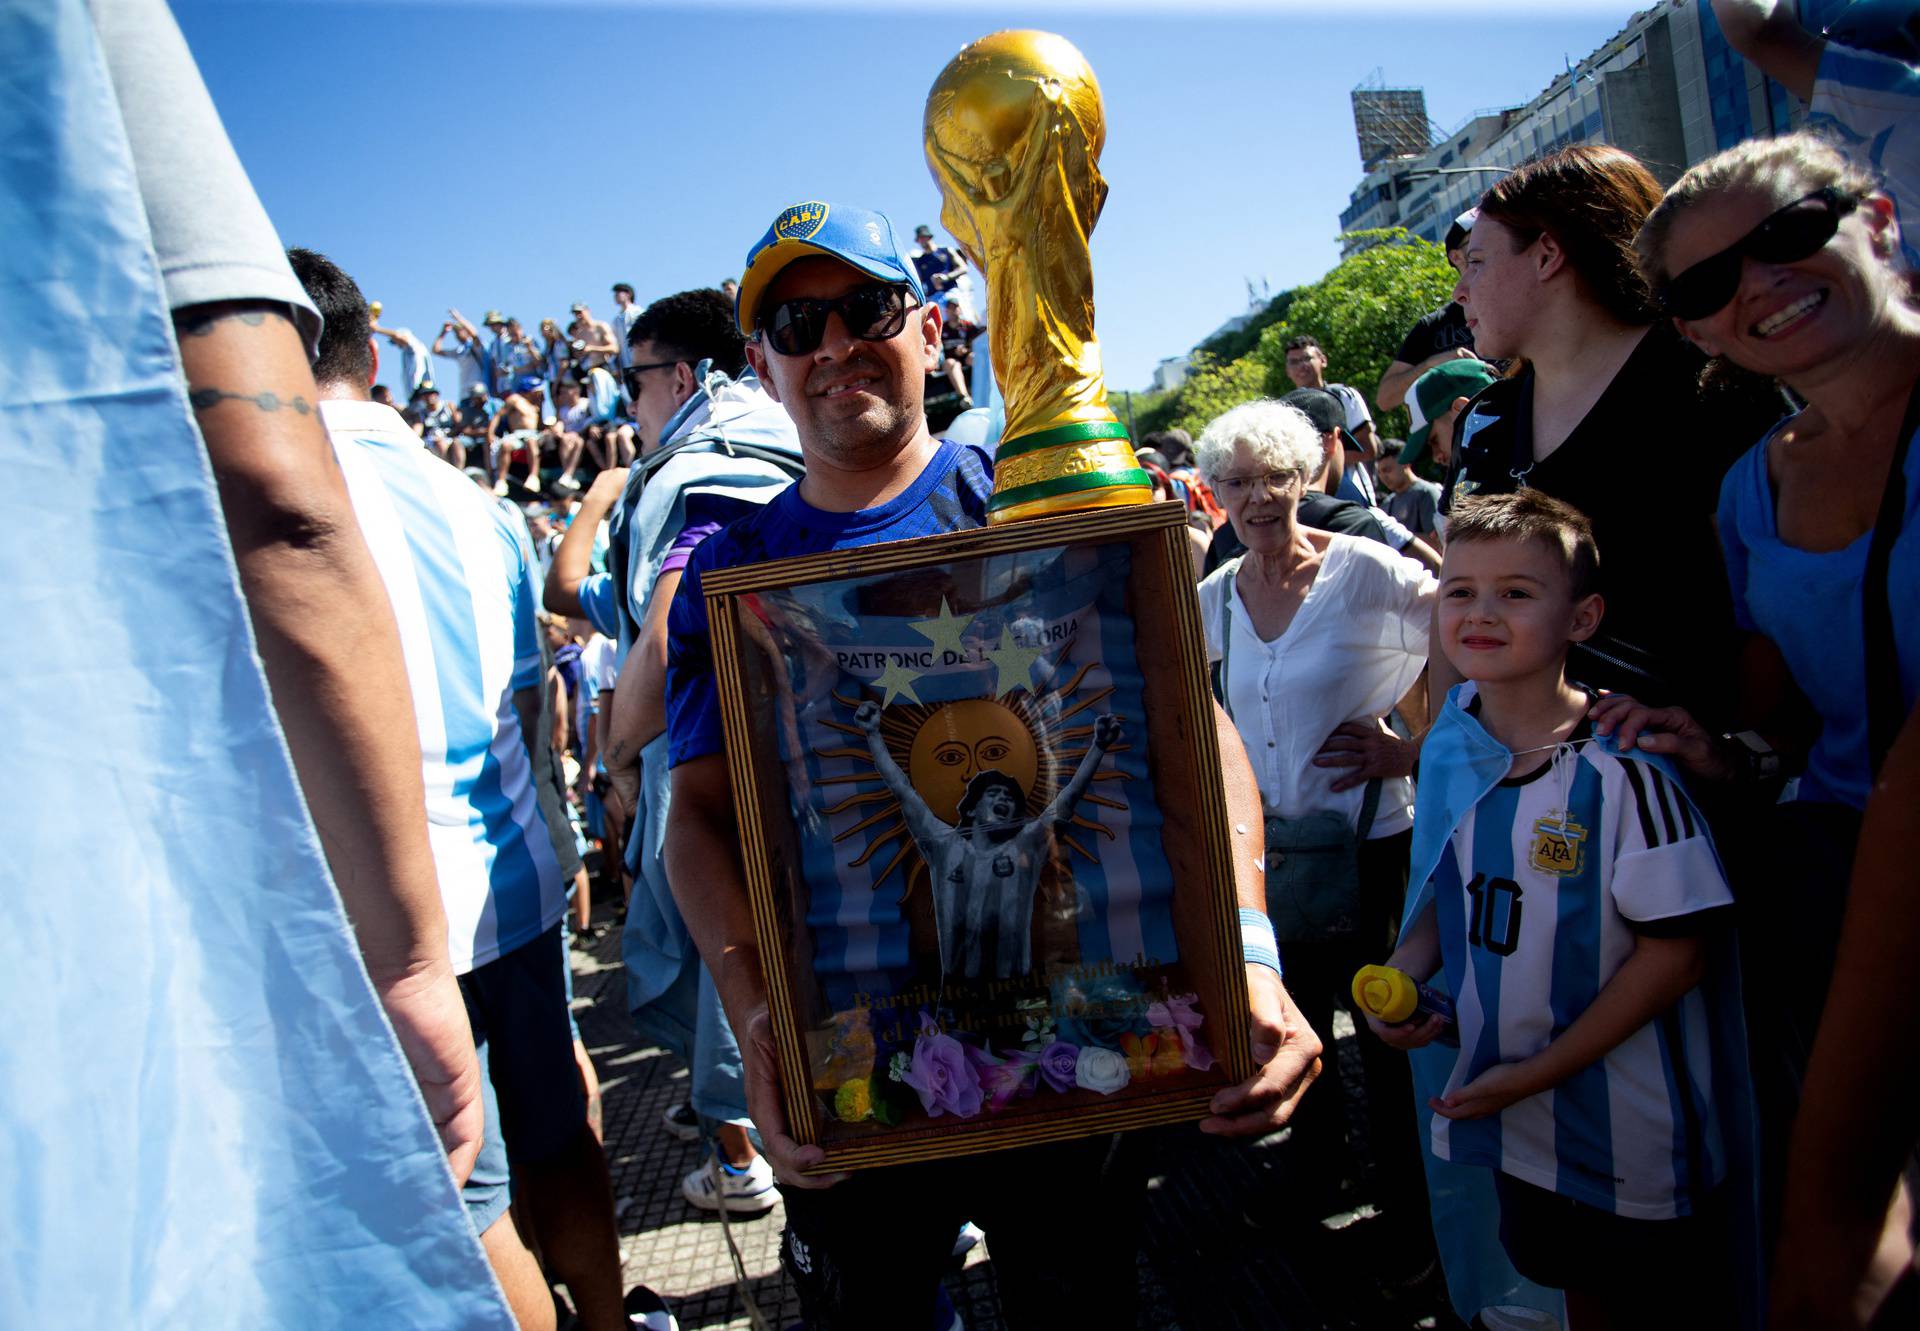 FIFA World Cup Qatar 2022 - Argentina Victory Parade after winning the World Cup